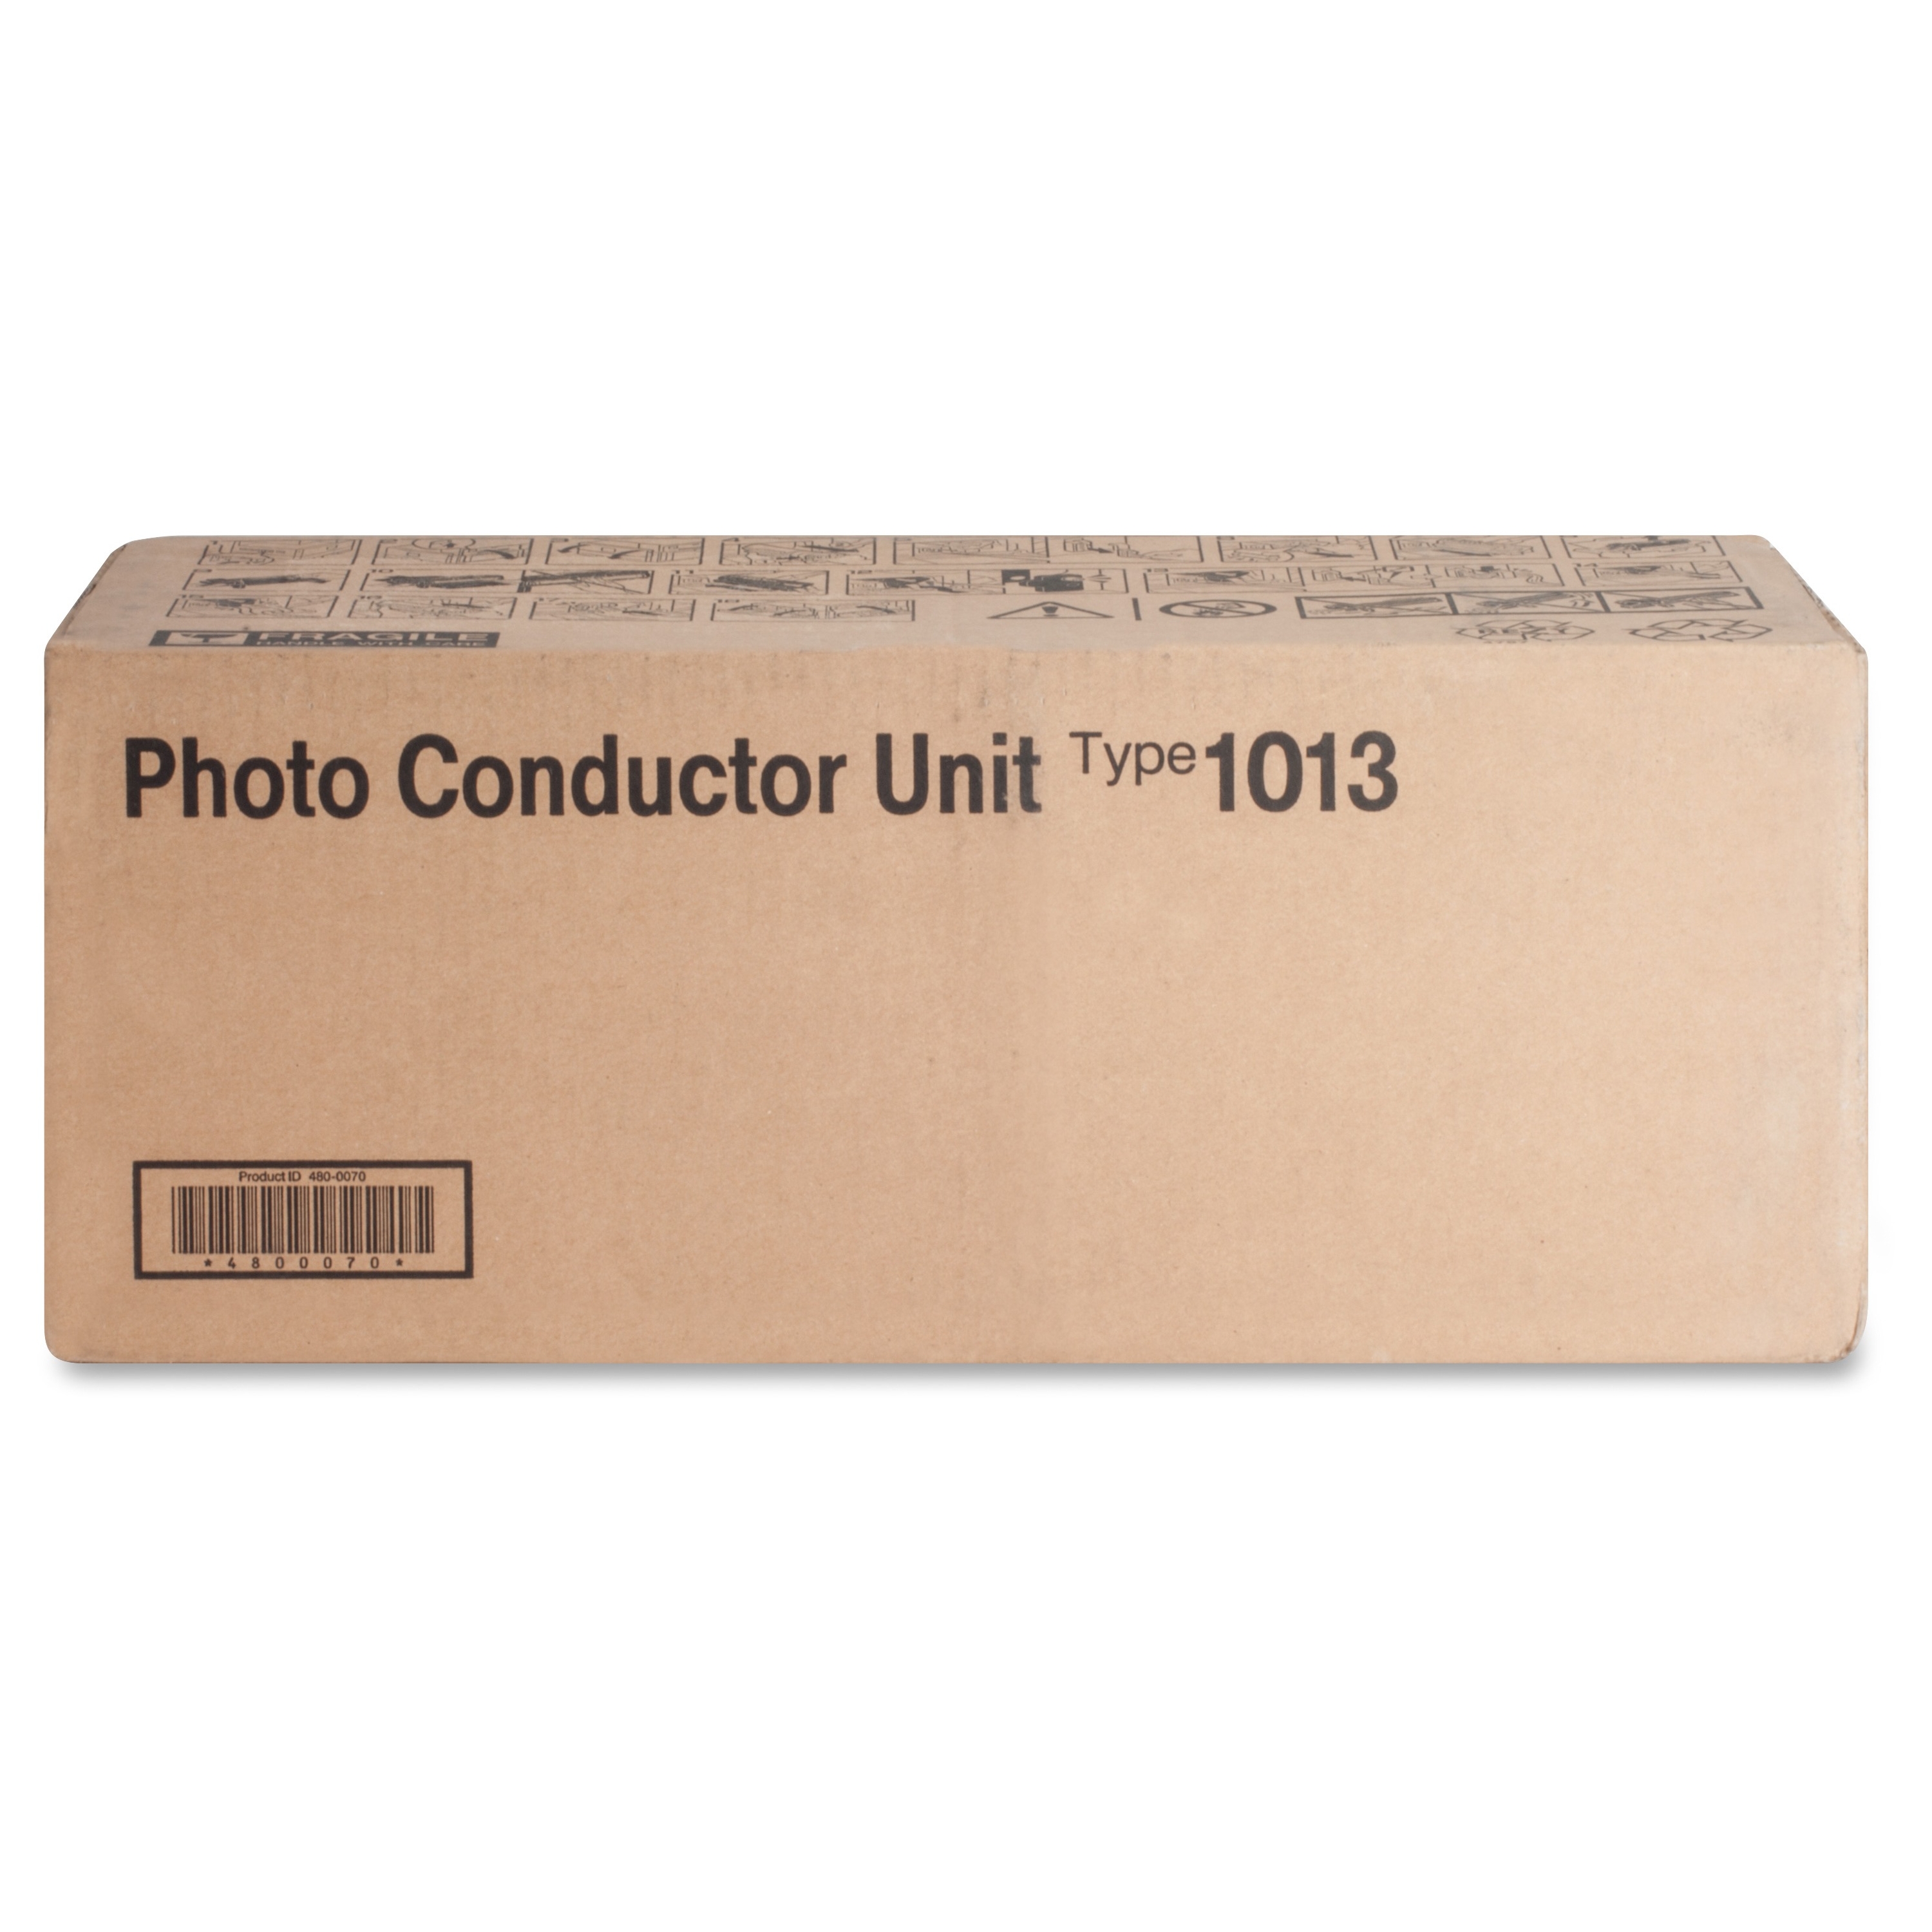 Ricoh 411113 Drum Unit (45 000 Yield) (Type 1013) - image 2 of 2